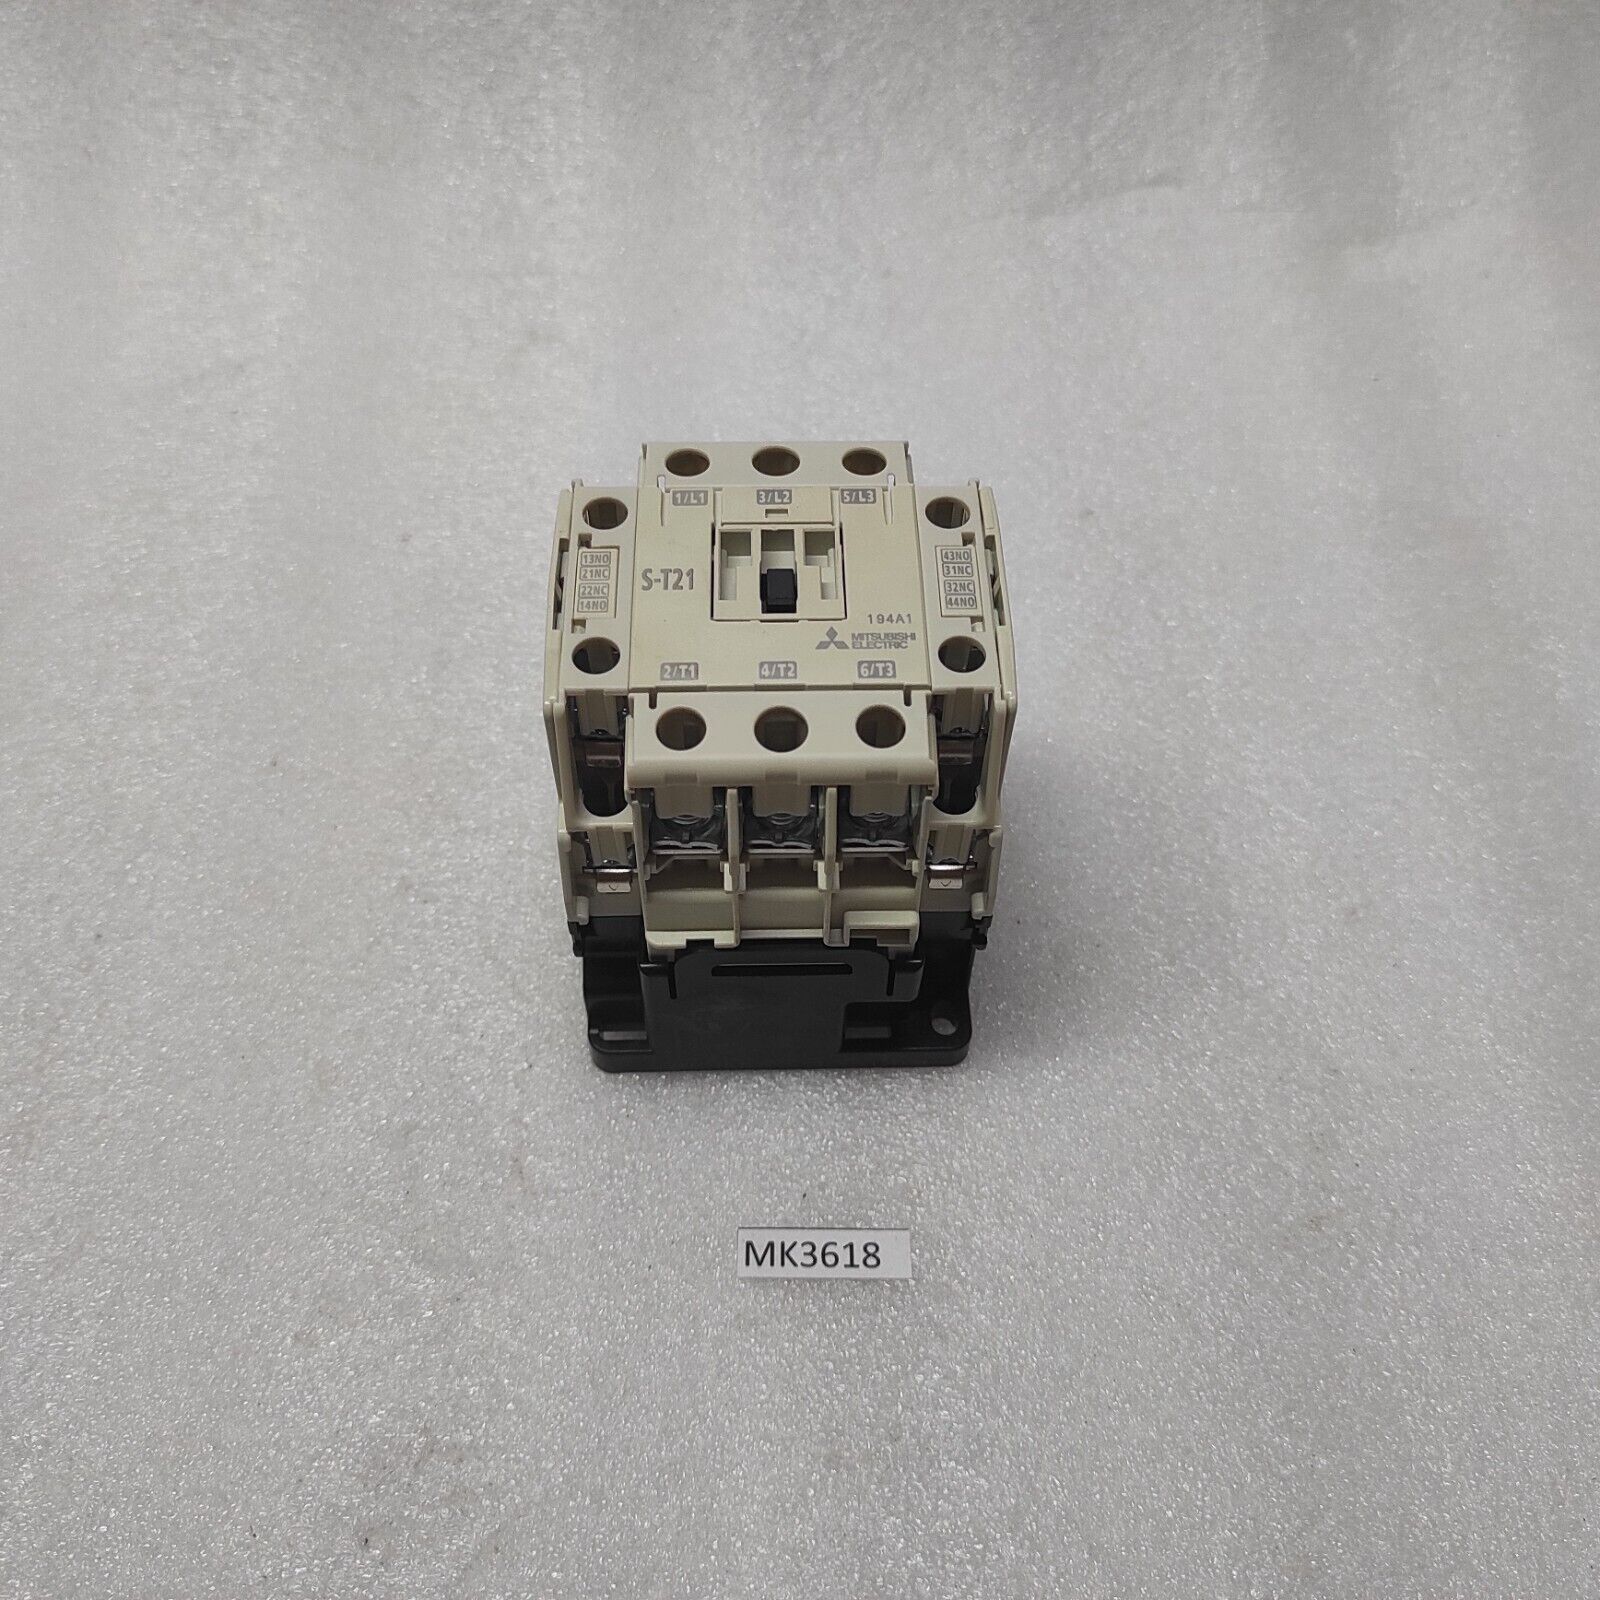 MITSUBISHI S-T21 MAGNETIC CONTACTOR COIL VOLTAGE 380-440V